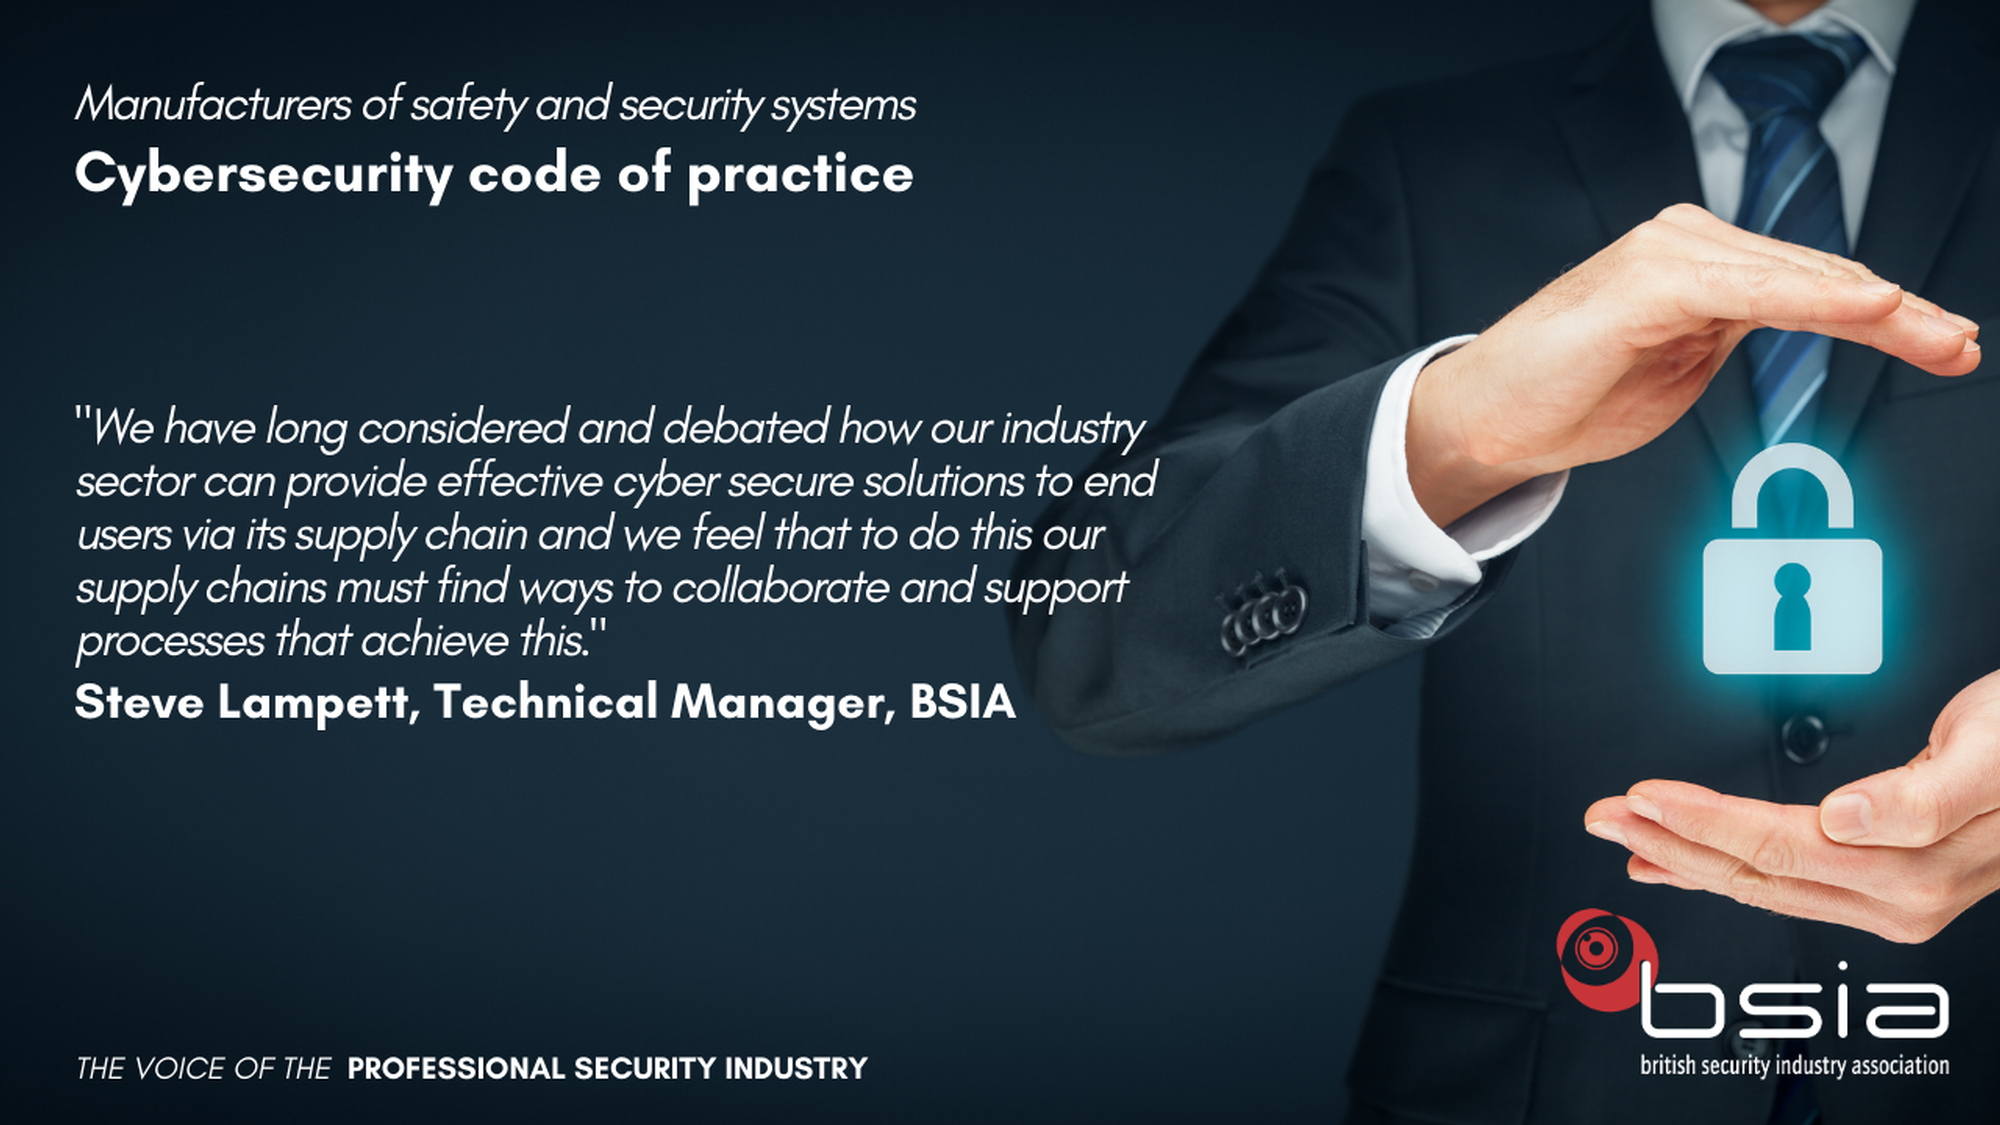 BSIA Cybersecurity group release new code of practice for manufacturers